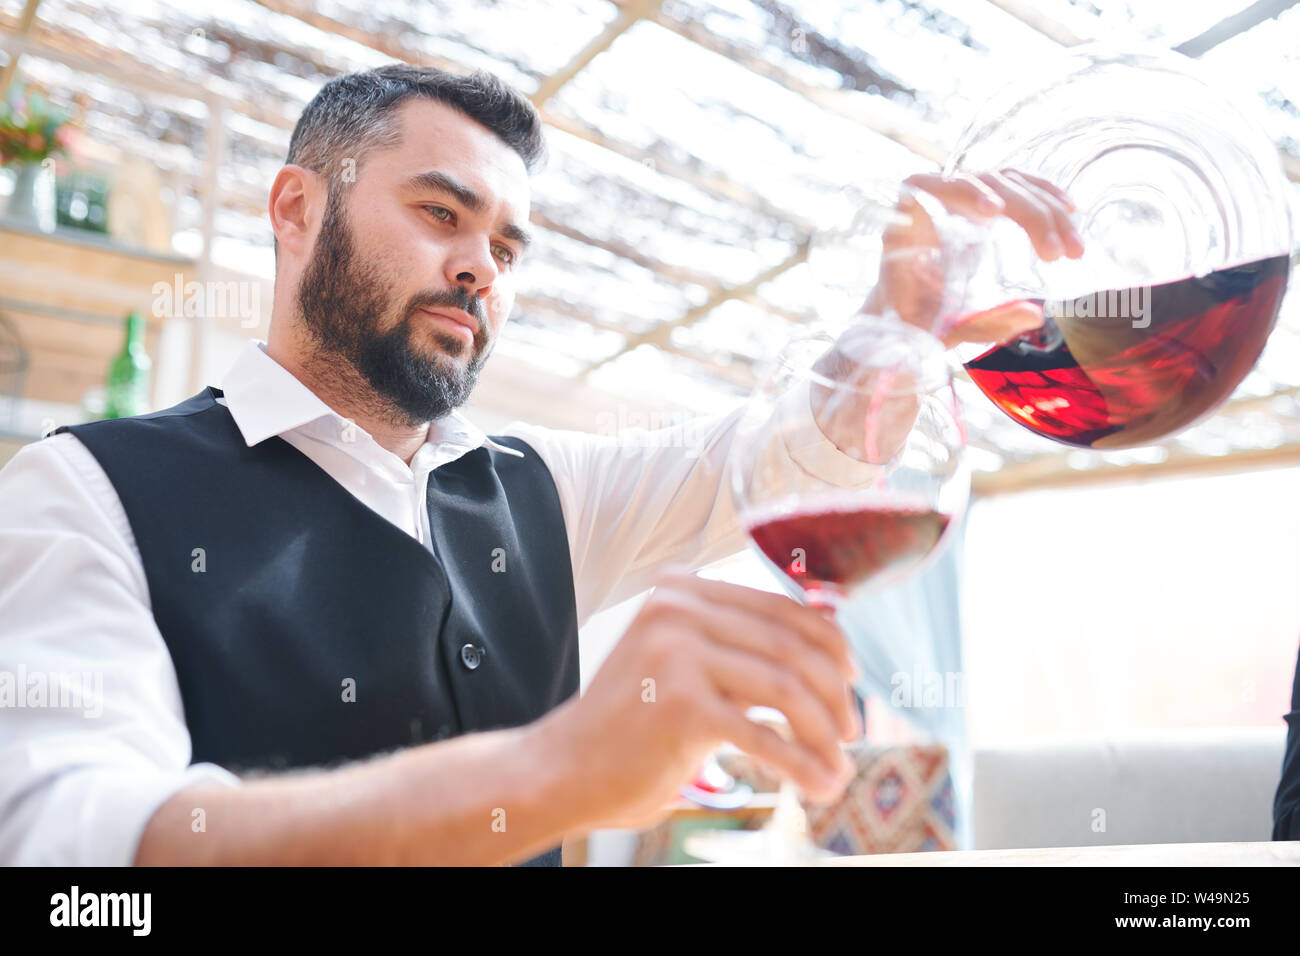 Young bearded barman or sommelier pouring red wine into wineglass Stock Photo